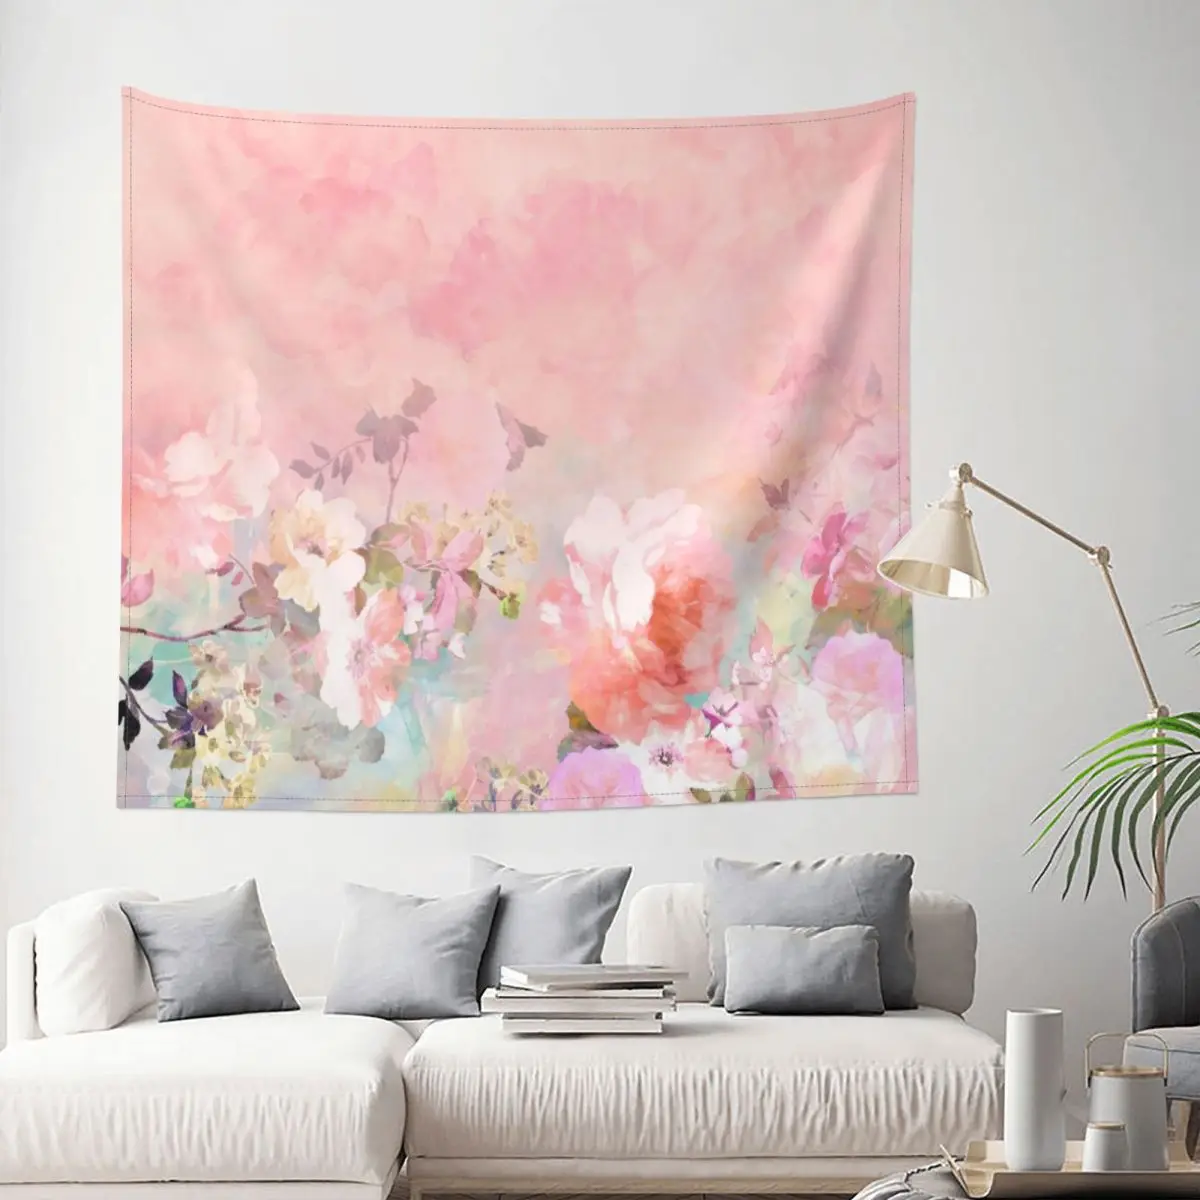 

Pastel Blush Watercolor Ombre Floral Tapestry Flower Floral Nature Art Decoration Wall Room Home Decor Hanging Bedroom Kawaii